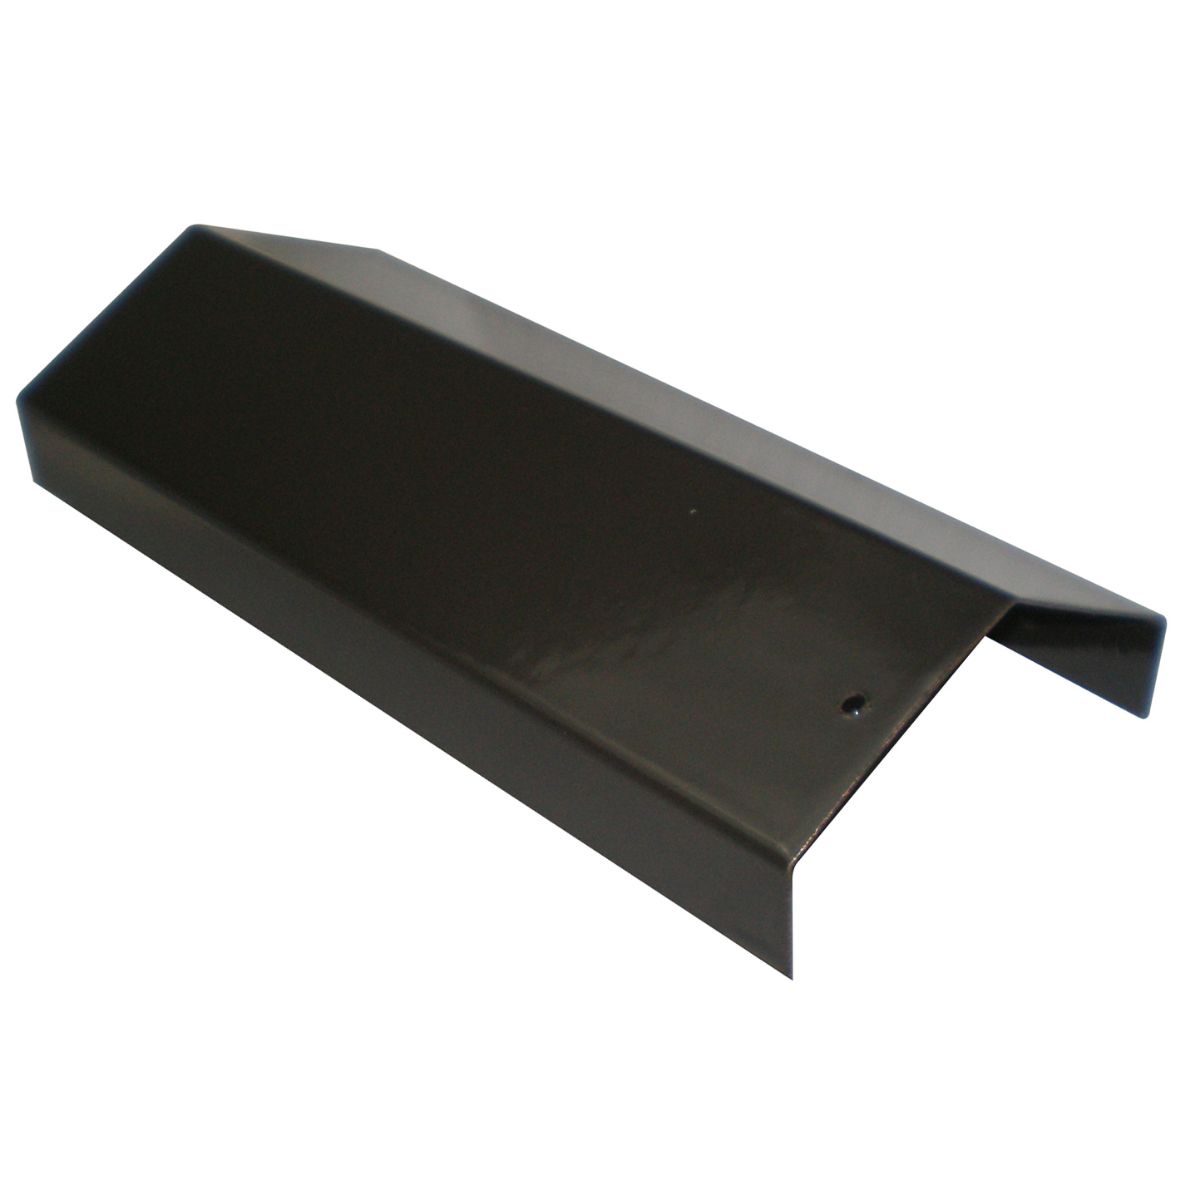 Porcelain steel heat plate for Four Seasons brand gas grills